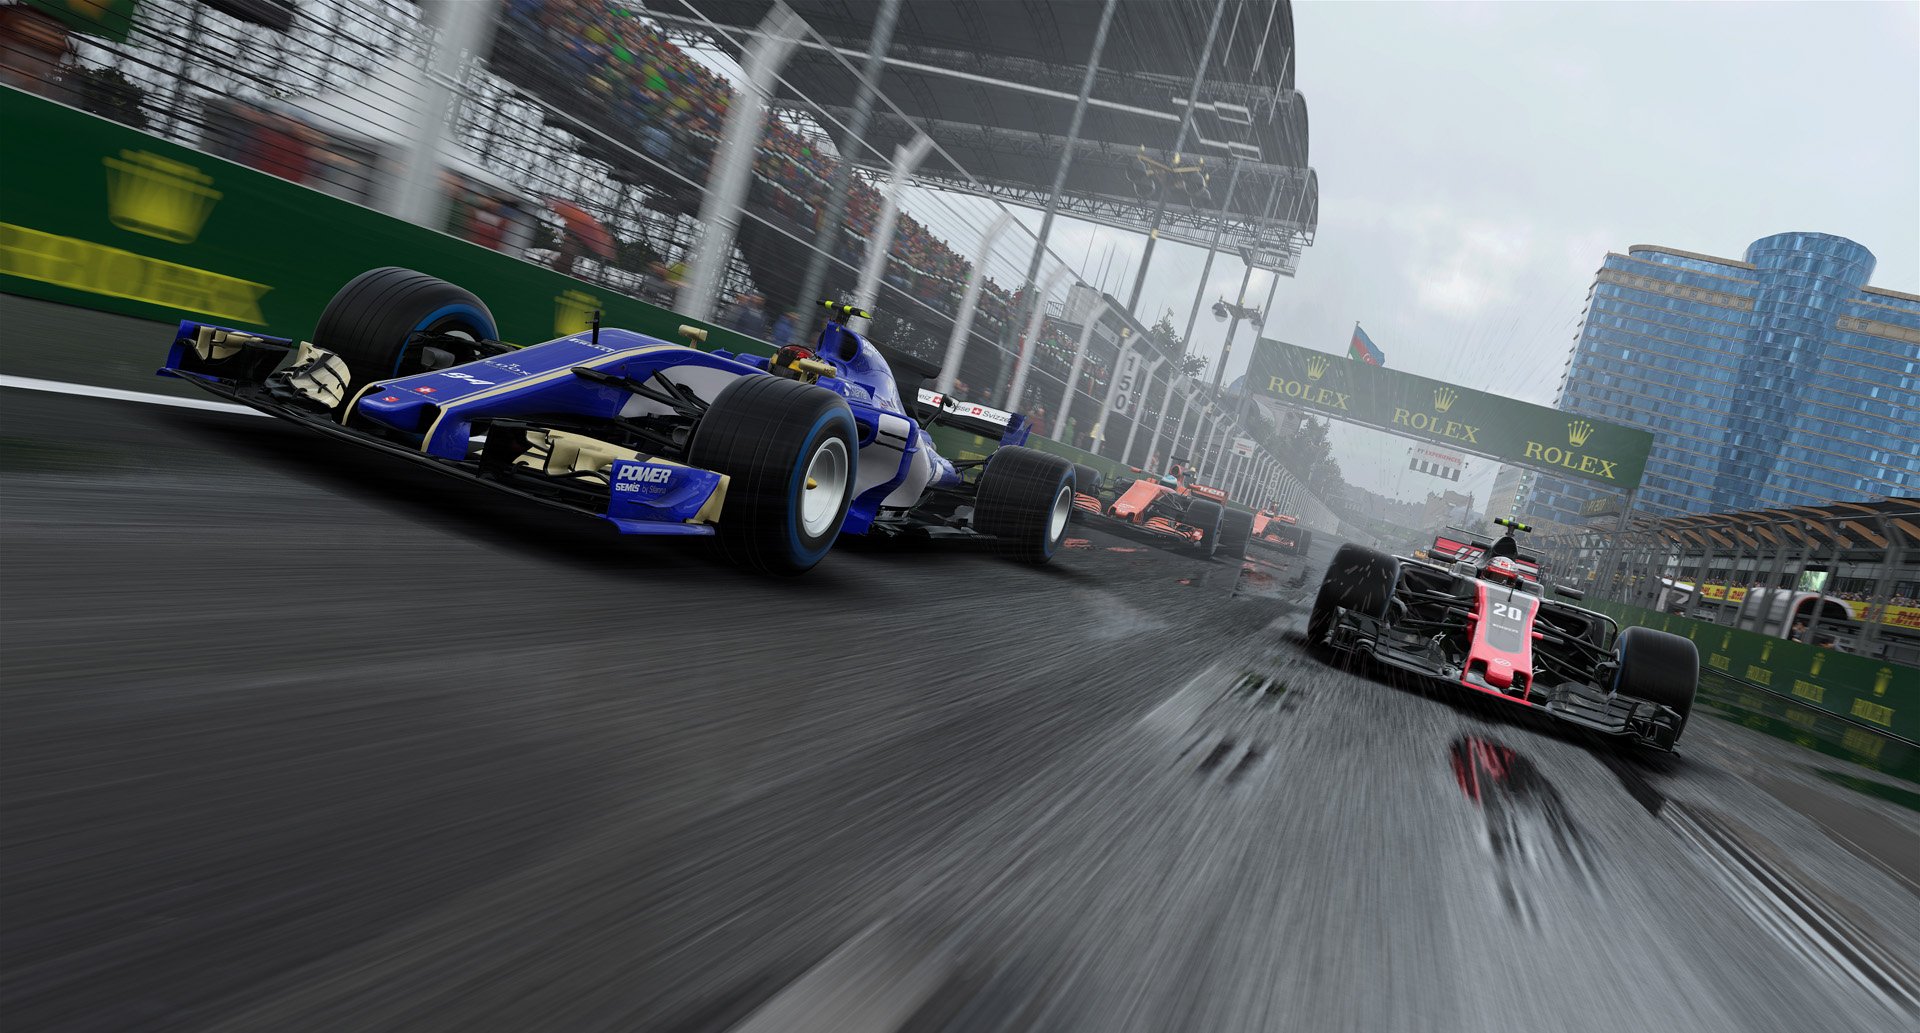 F1 2017 game review The most complete Formula 1 game on PS4 and Xbox One